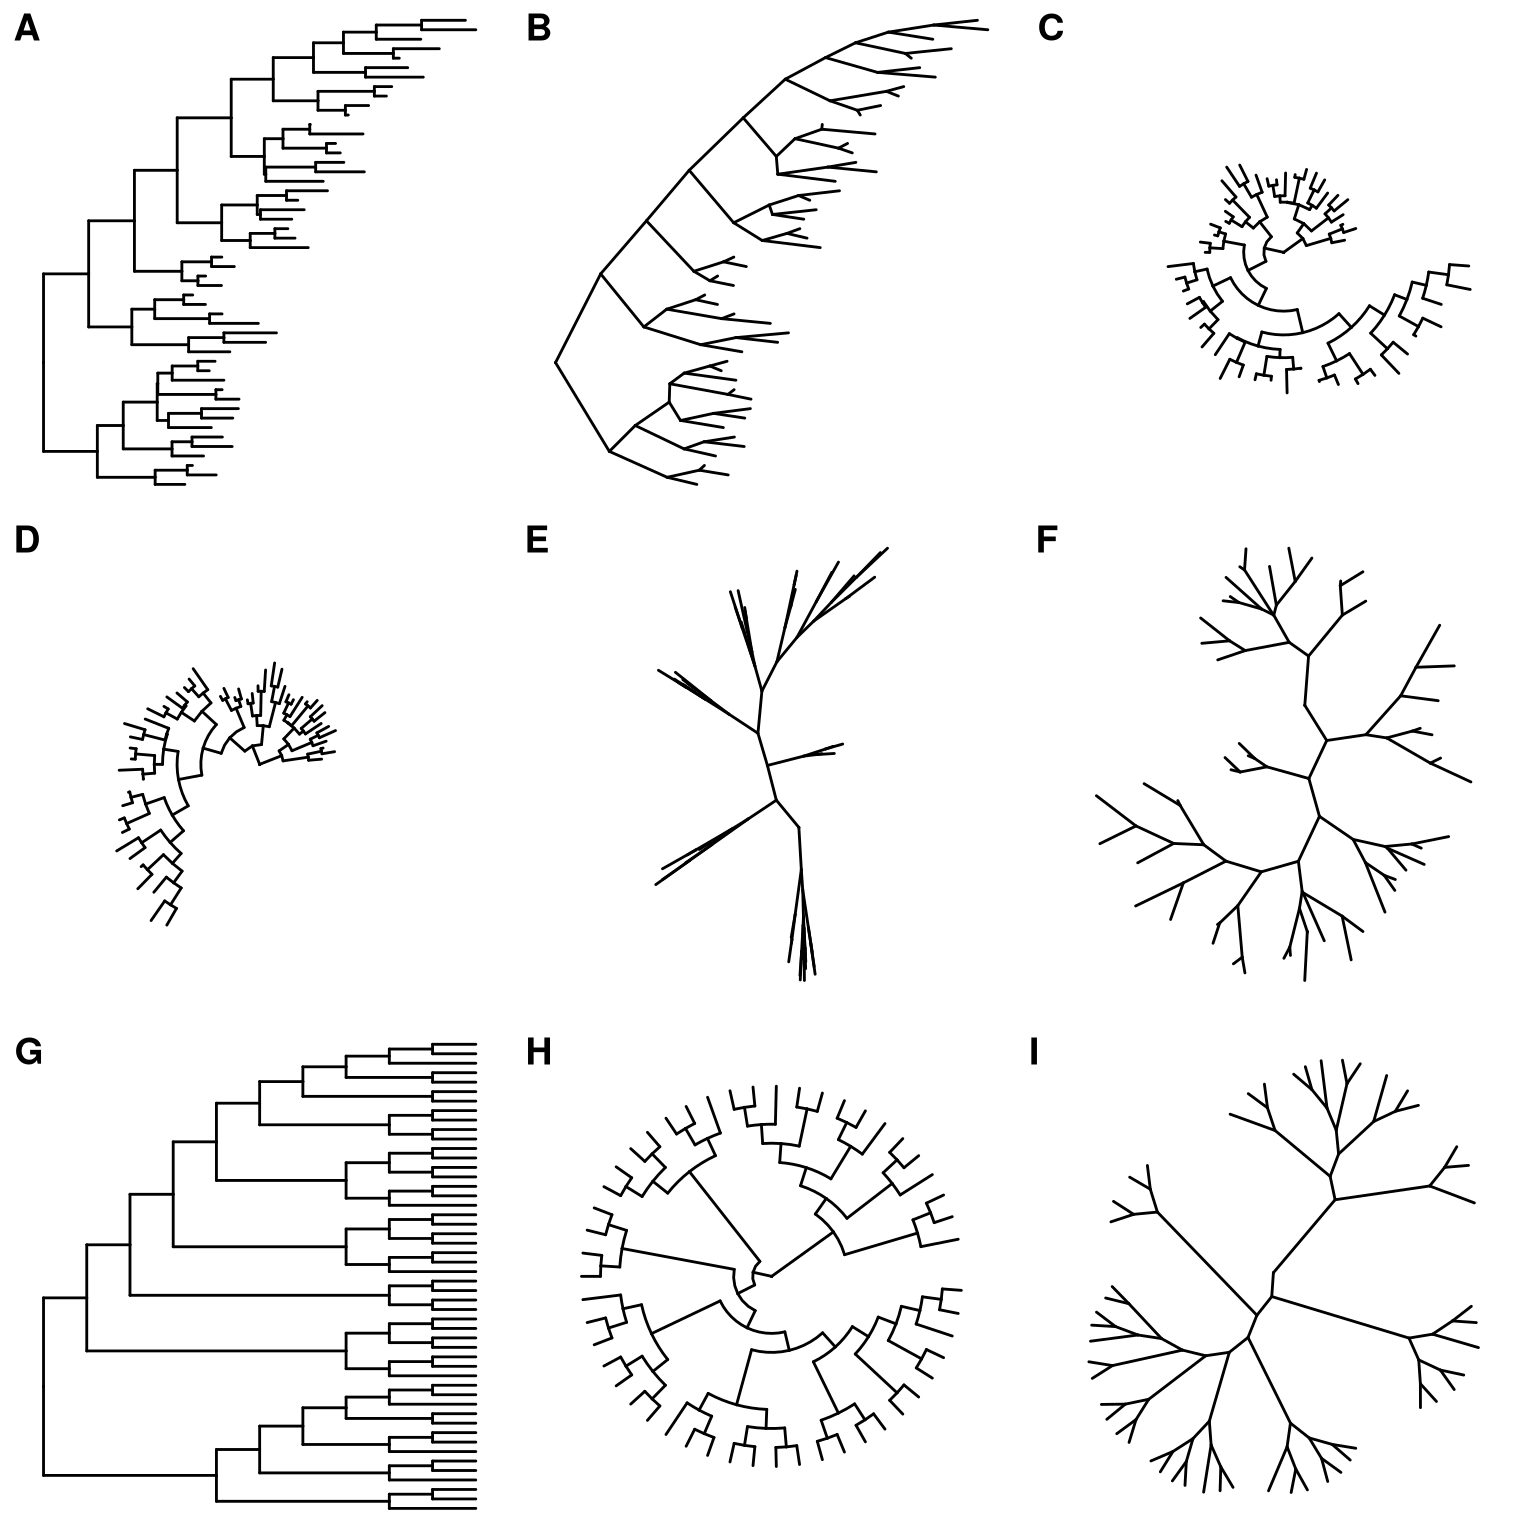 Tree layouts. Phylogram: rectangular layout (A), slanted layout (B), circular layout (C) and fan layout (D). Unrooted: equal-angle method (E) and daylight method (F). Cladogram: rectangular layout (G), circular layout (H) and unrooted layout (I). Slanted and fan layouts for cladogram are also supported.